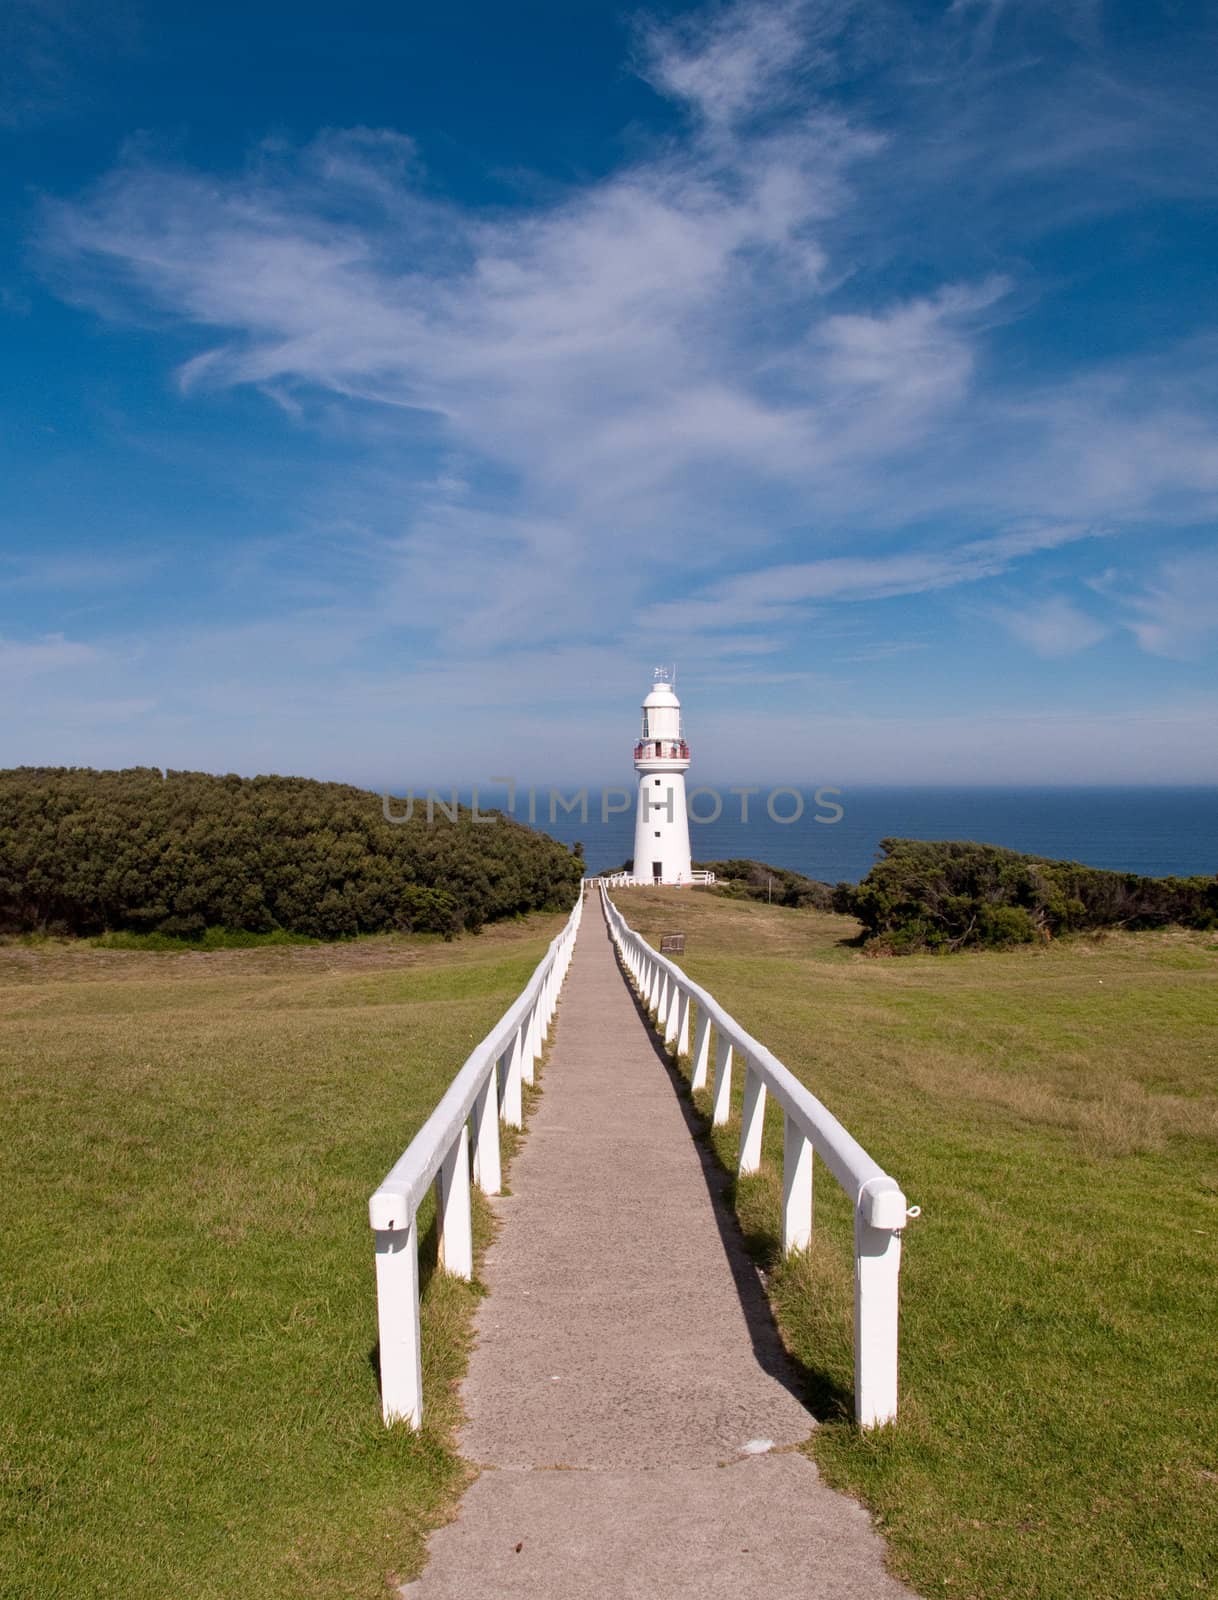 Cape Otway Lighthouse by steheap